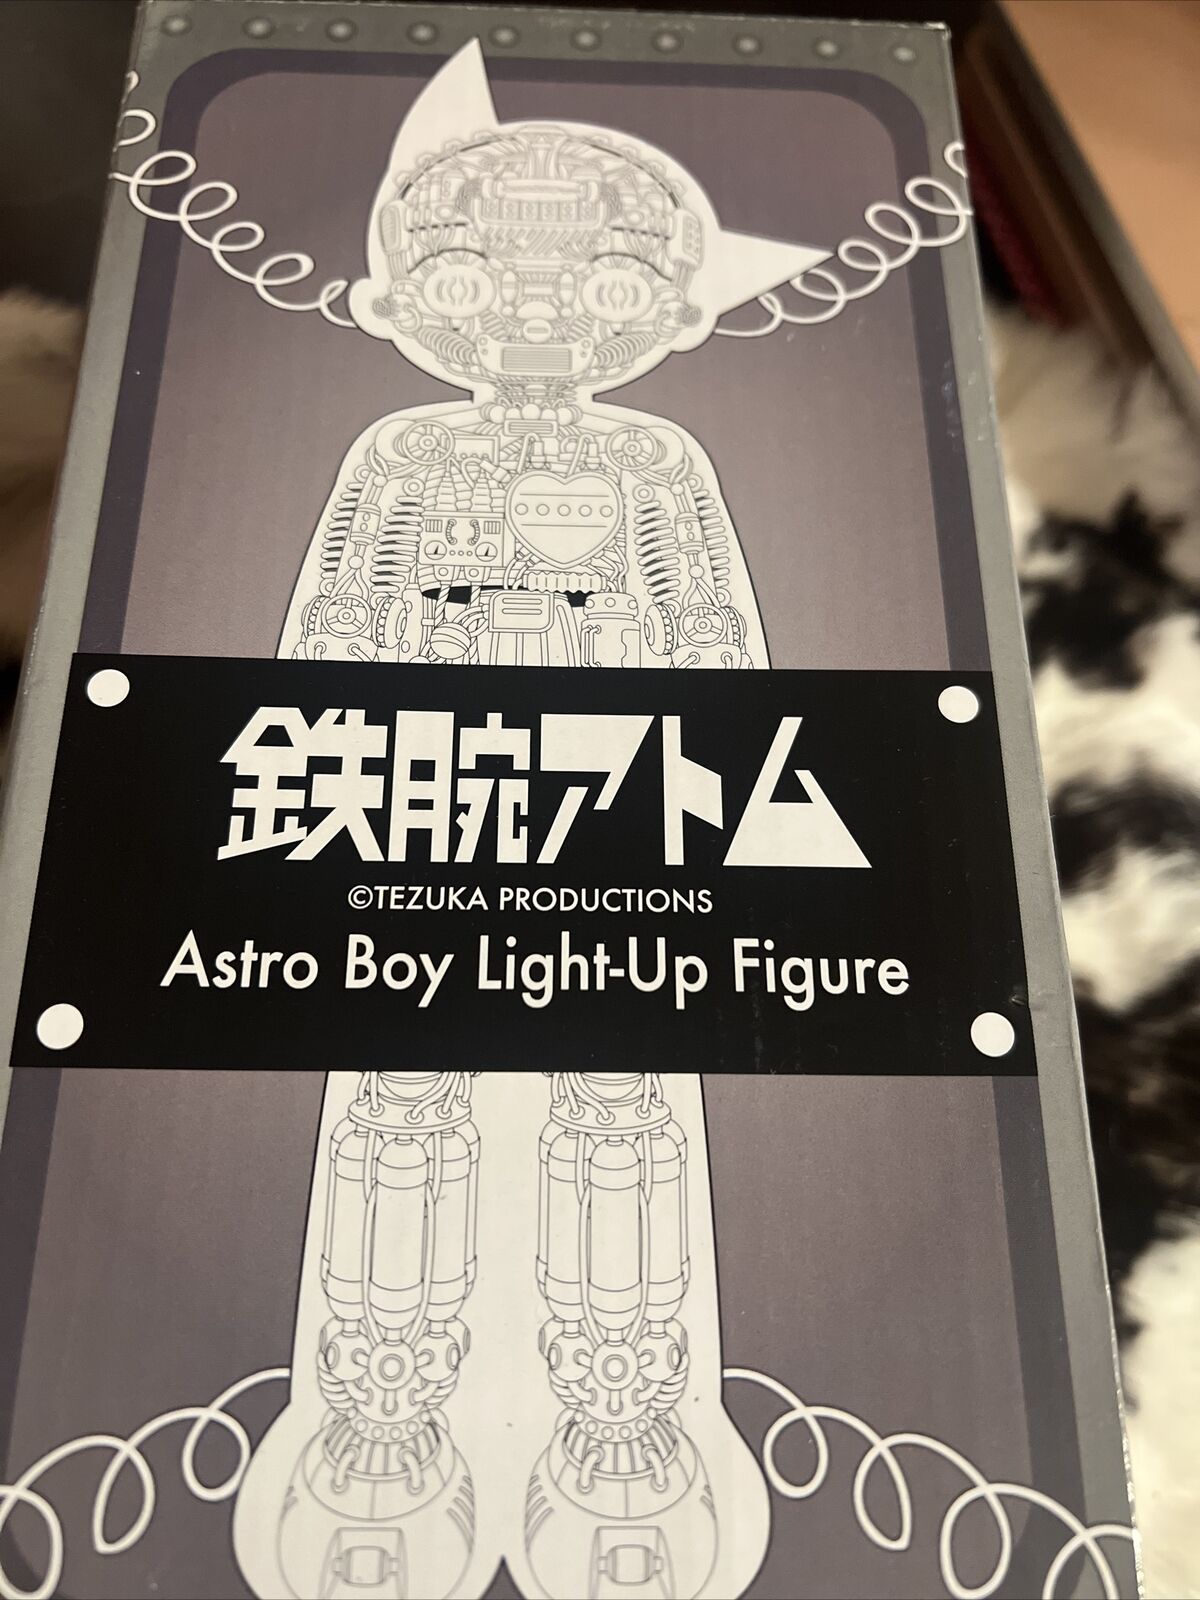 Vtg Astro Boy Light Up Figure Loot Crate Exclusive Tezuka Productions 2018.*28